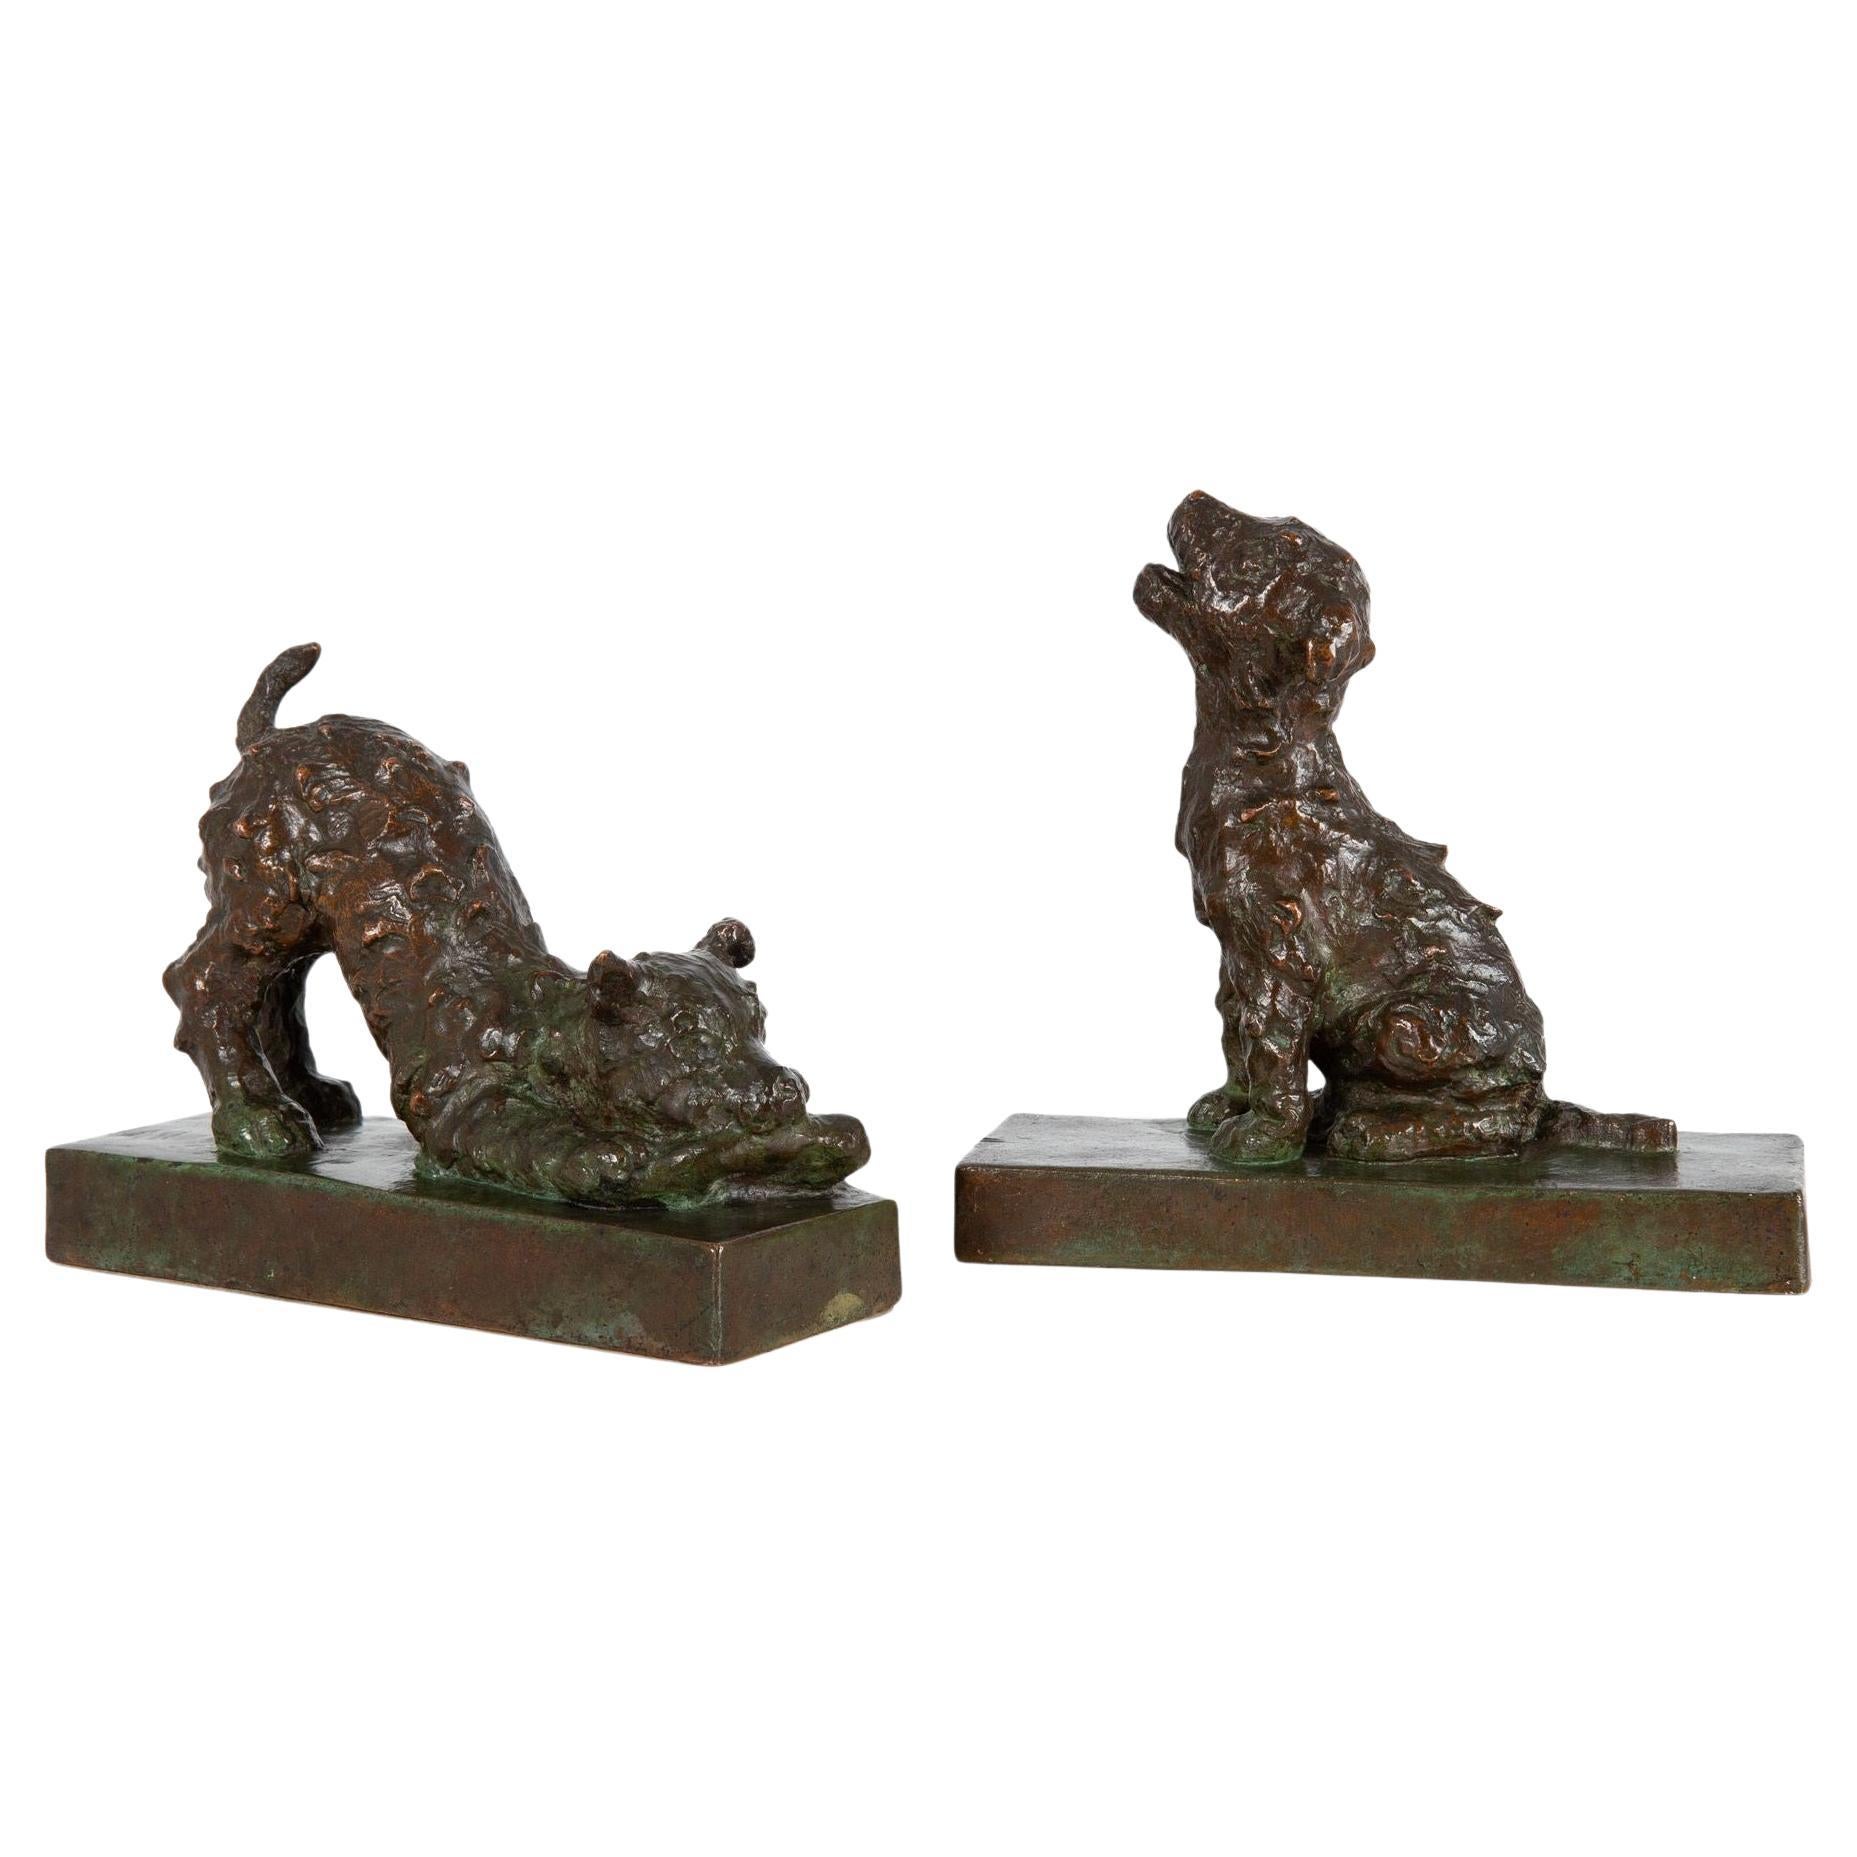 Rare Pair of “Terriers” Bookends Bronze Sculpture by Edith Baretto Parsons For Sale